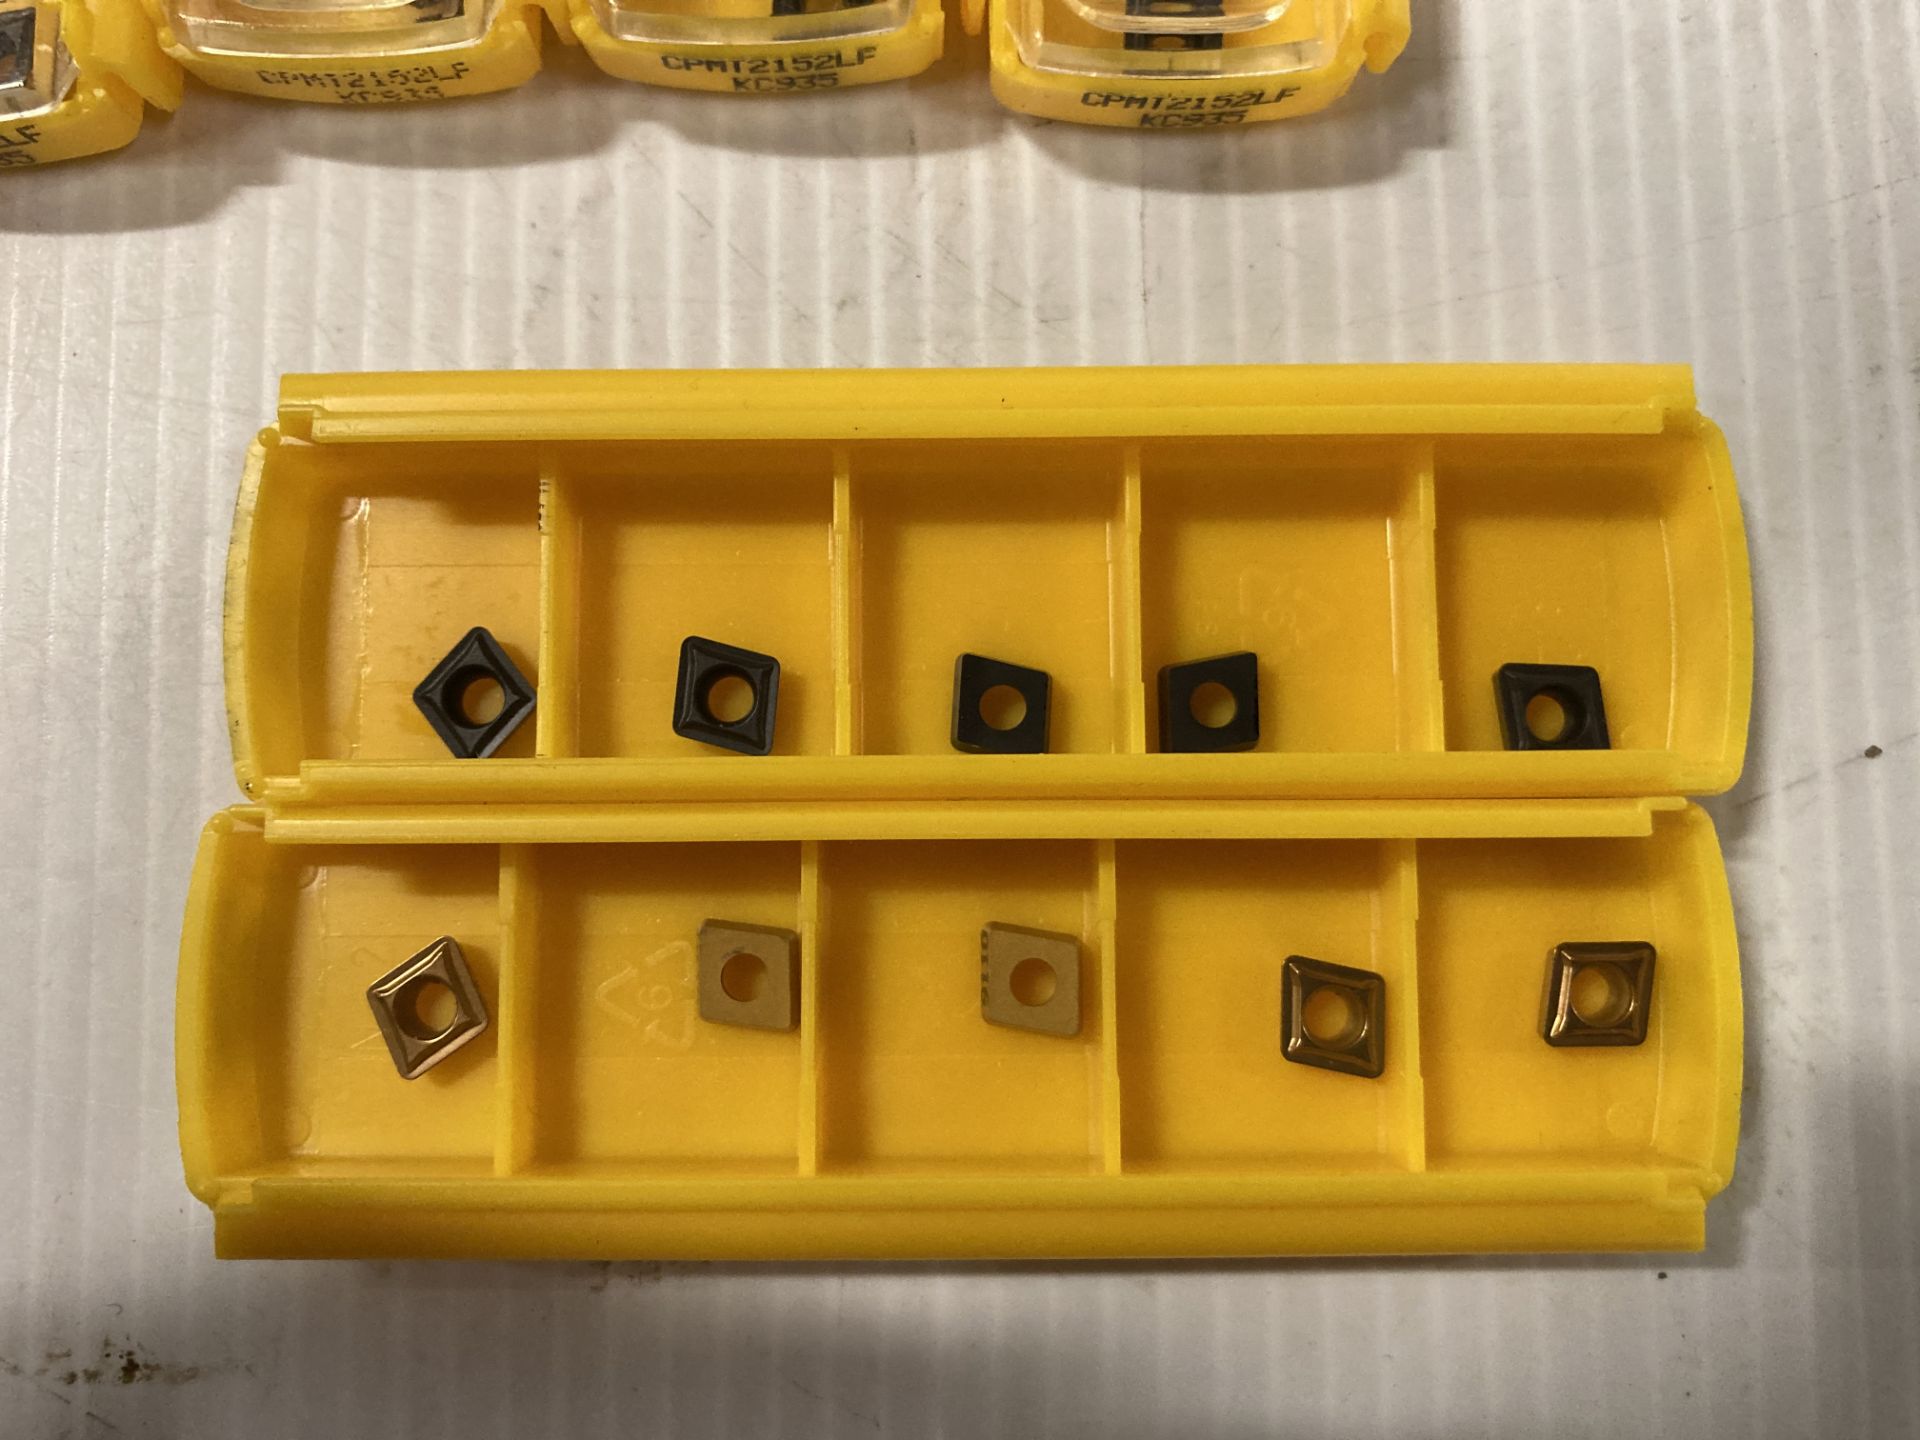 Lot of (179) New? Kennametal Carbide Inserts, P/N: CPMT2152LF CMPM 06 02 08LF Appears to be unused - Image 2 of 3